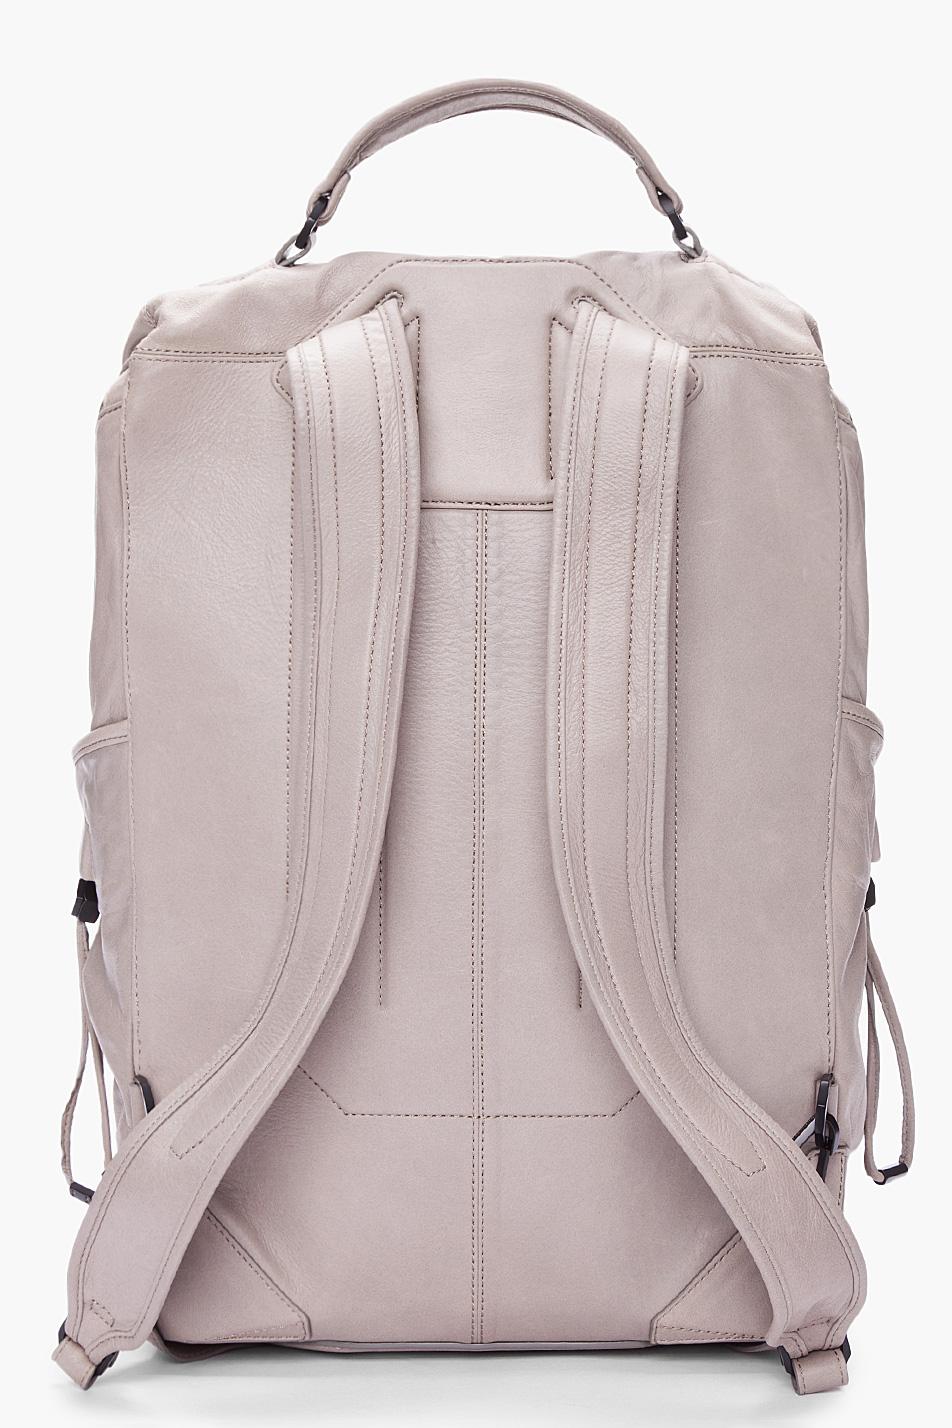 Alexander wang Leather Wallie Backpack in Gray for Men | Lyst